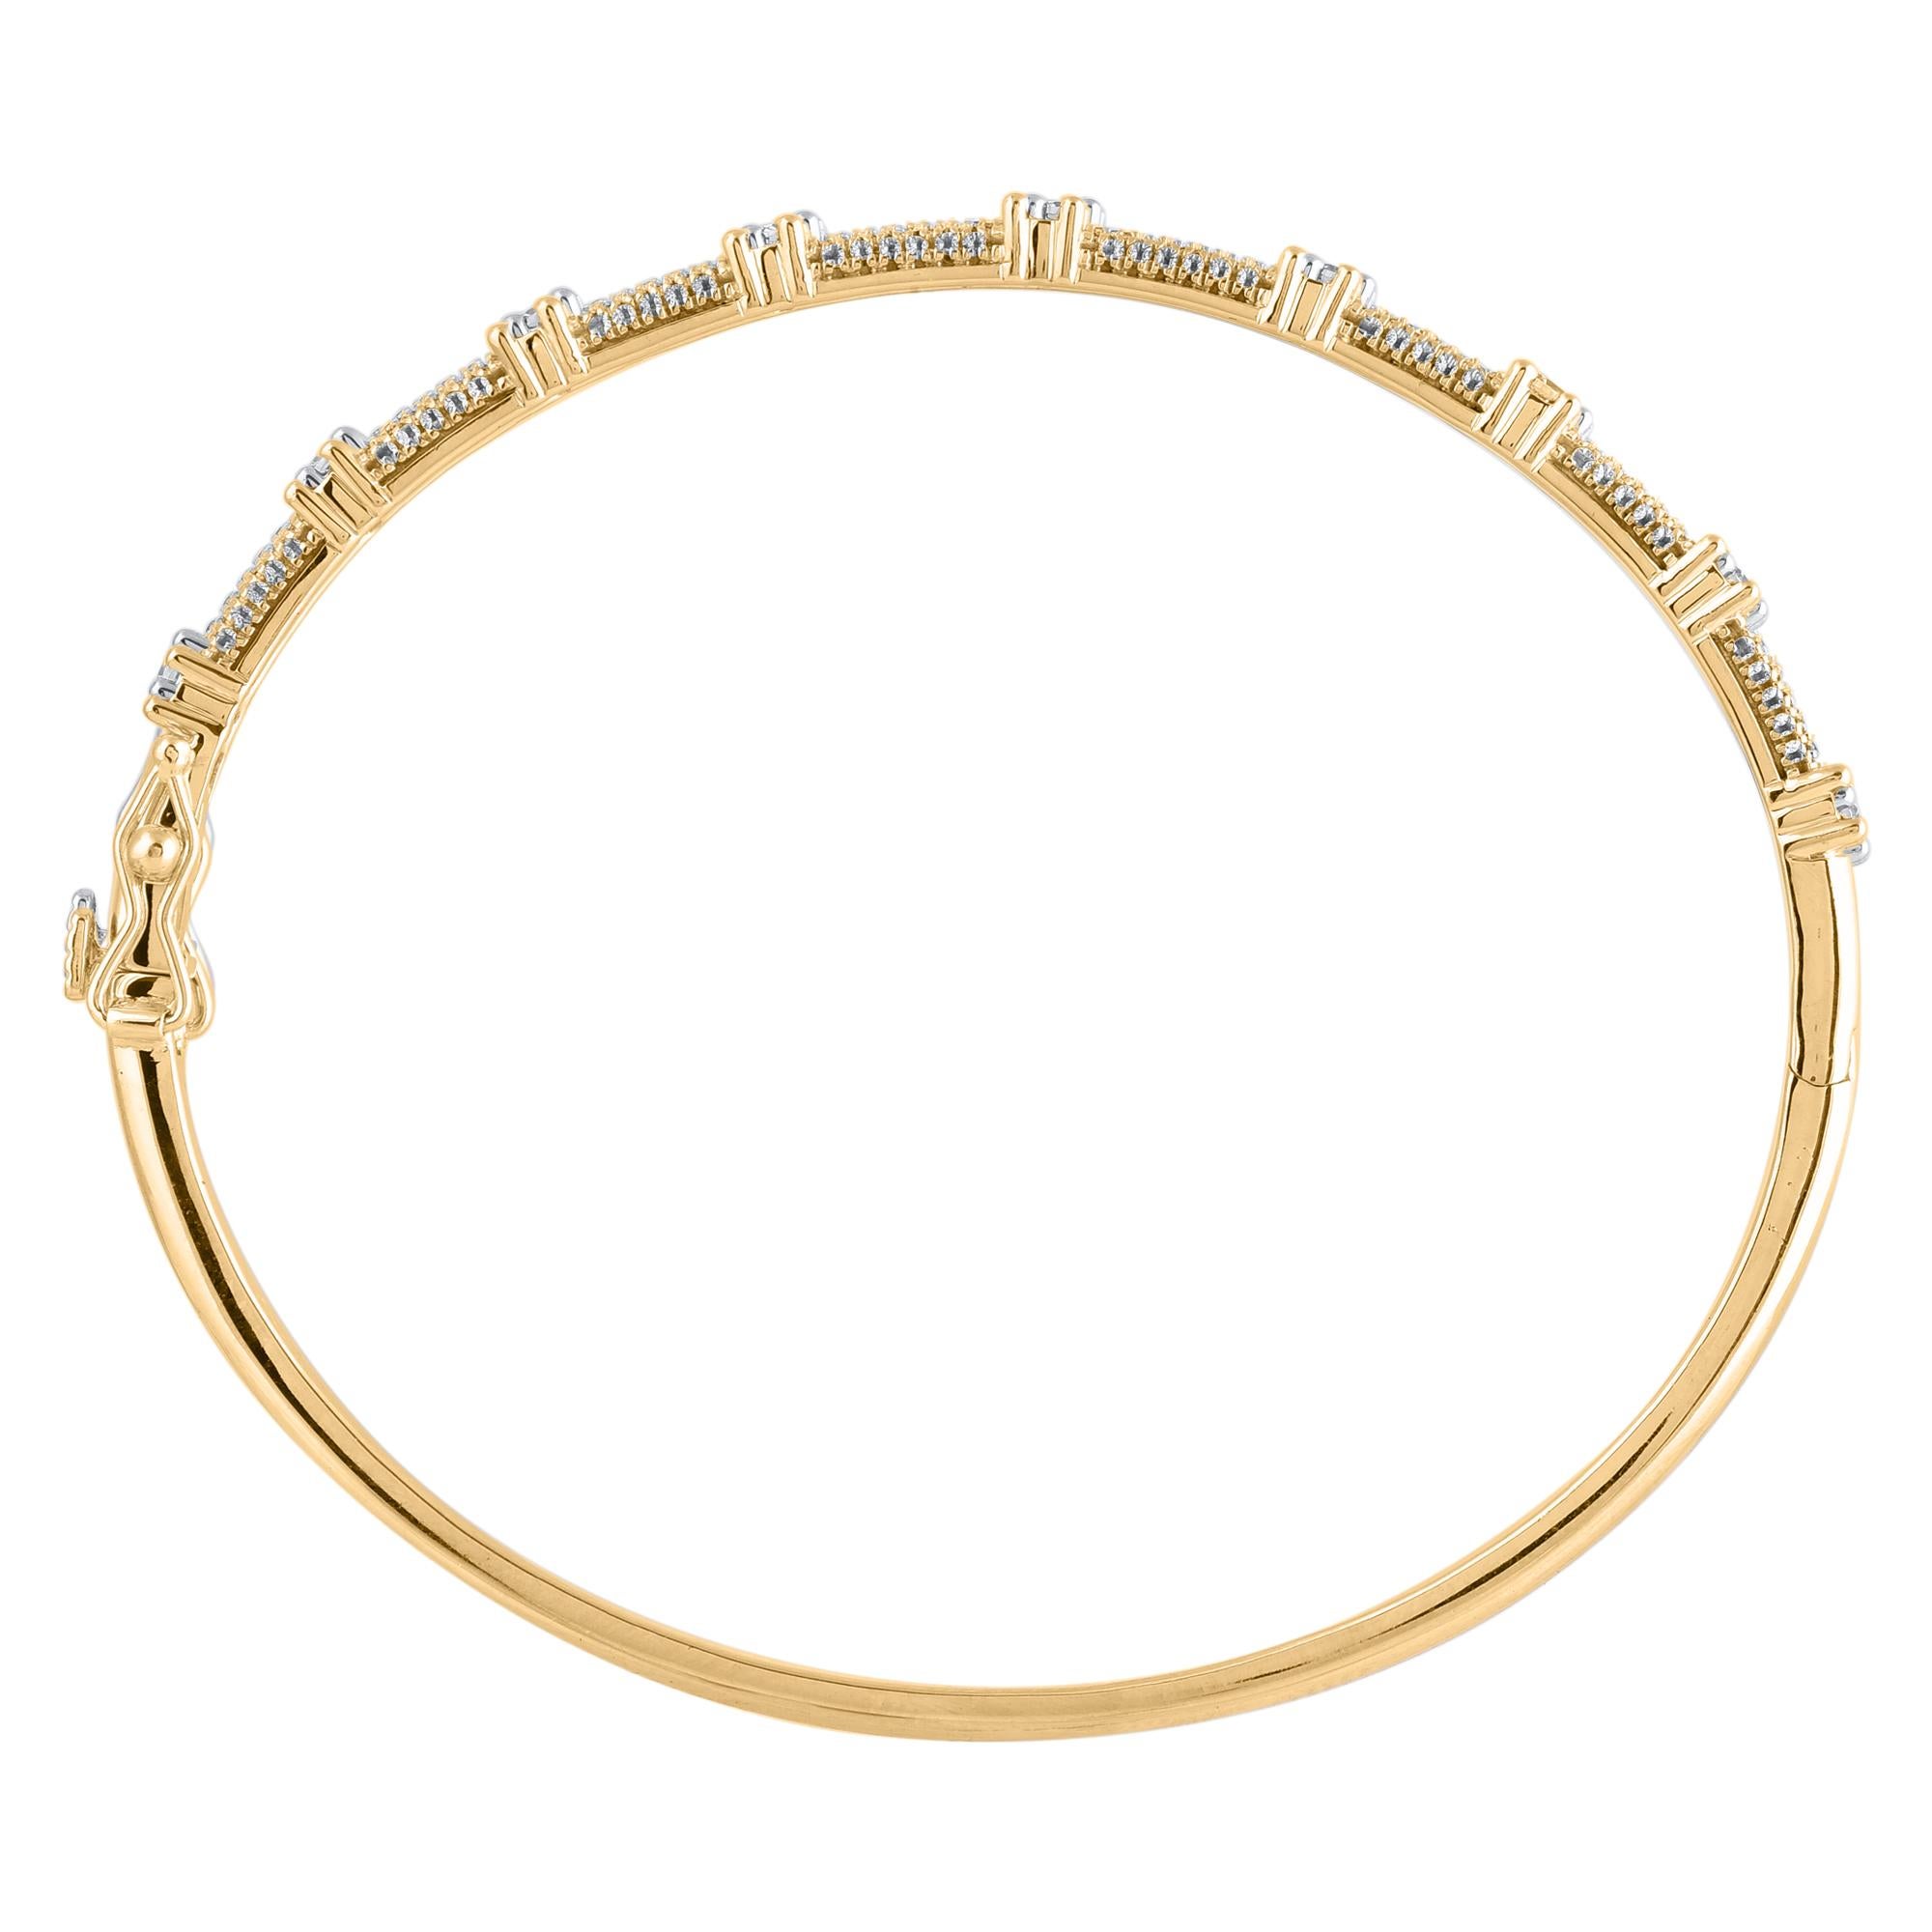 Express your sophisticated style with this gorgeous diamond bangle bracelet. This Shimmering bangle bracelet features 143 natural round single cut and brilliant cut diamonds in prong setting and crafted in 14kt yellow gold. Diamonds are graded H-I